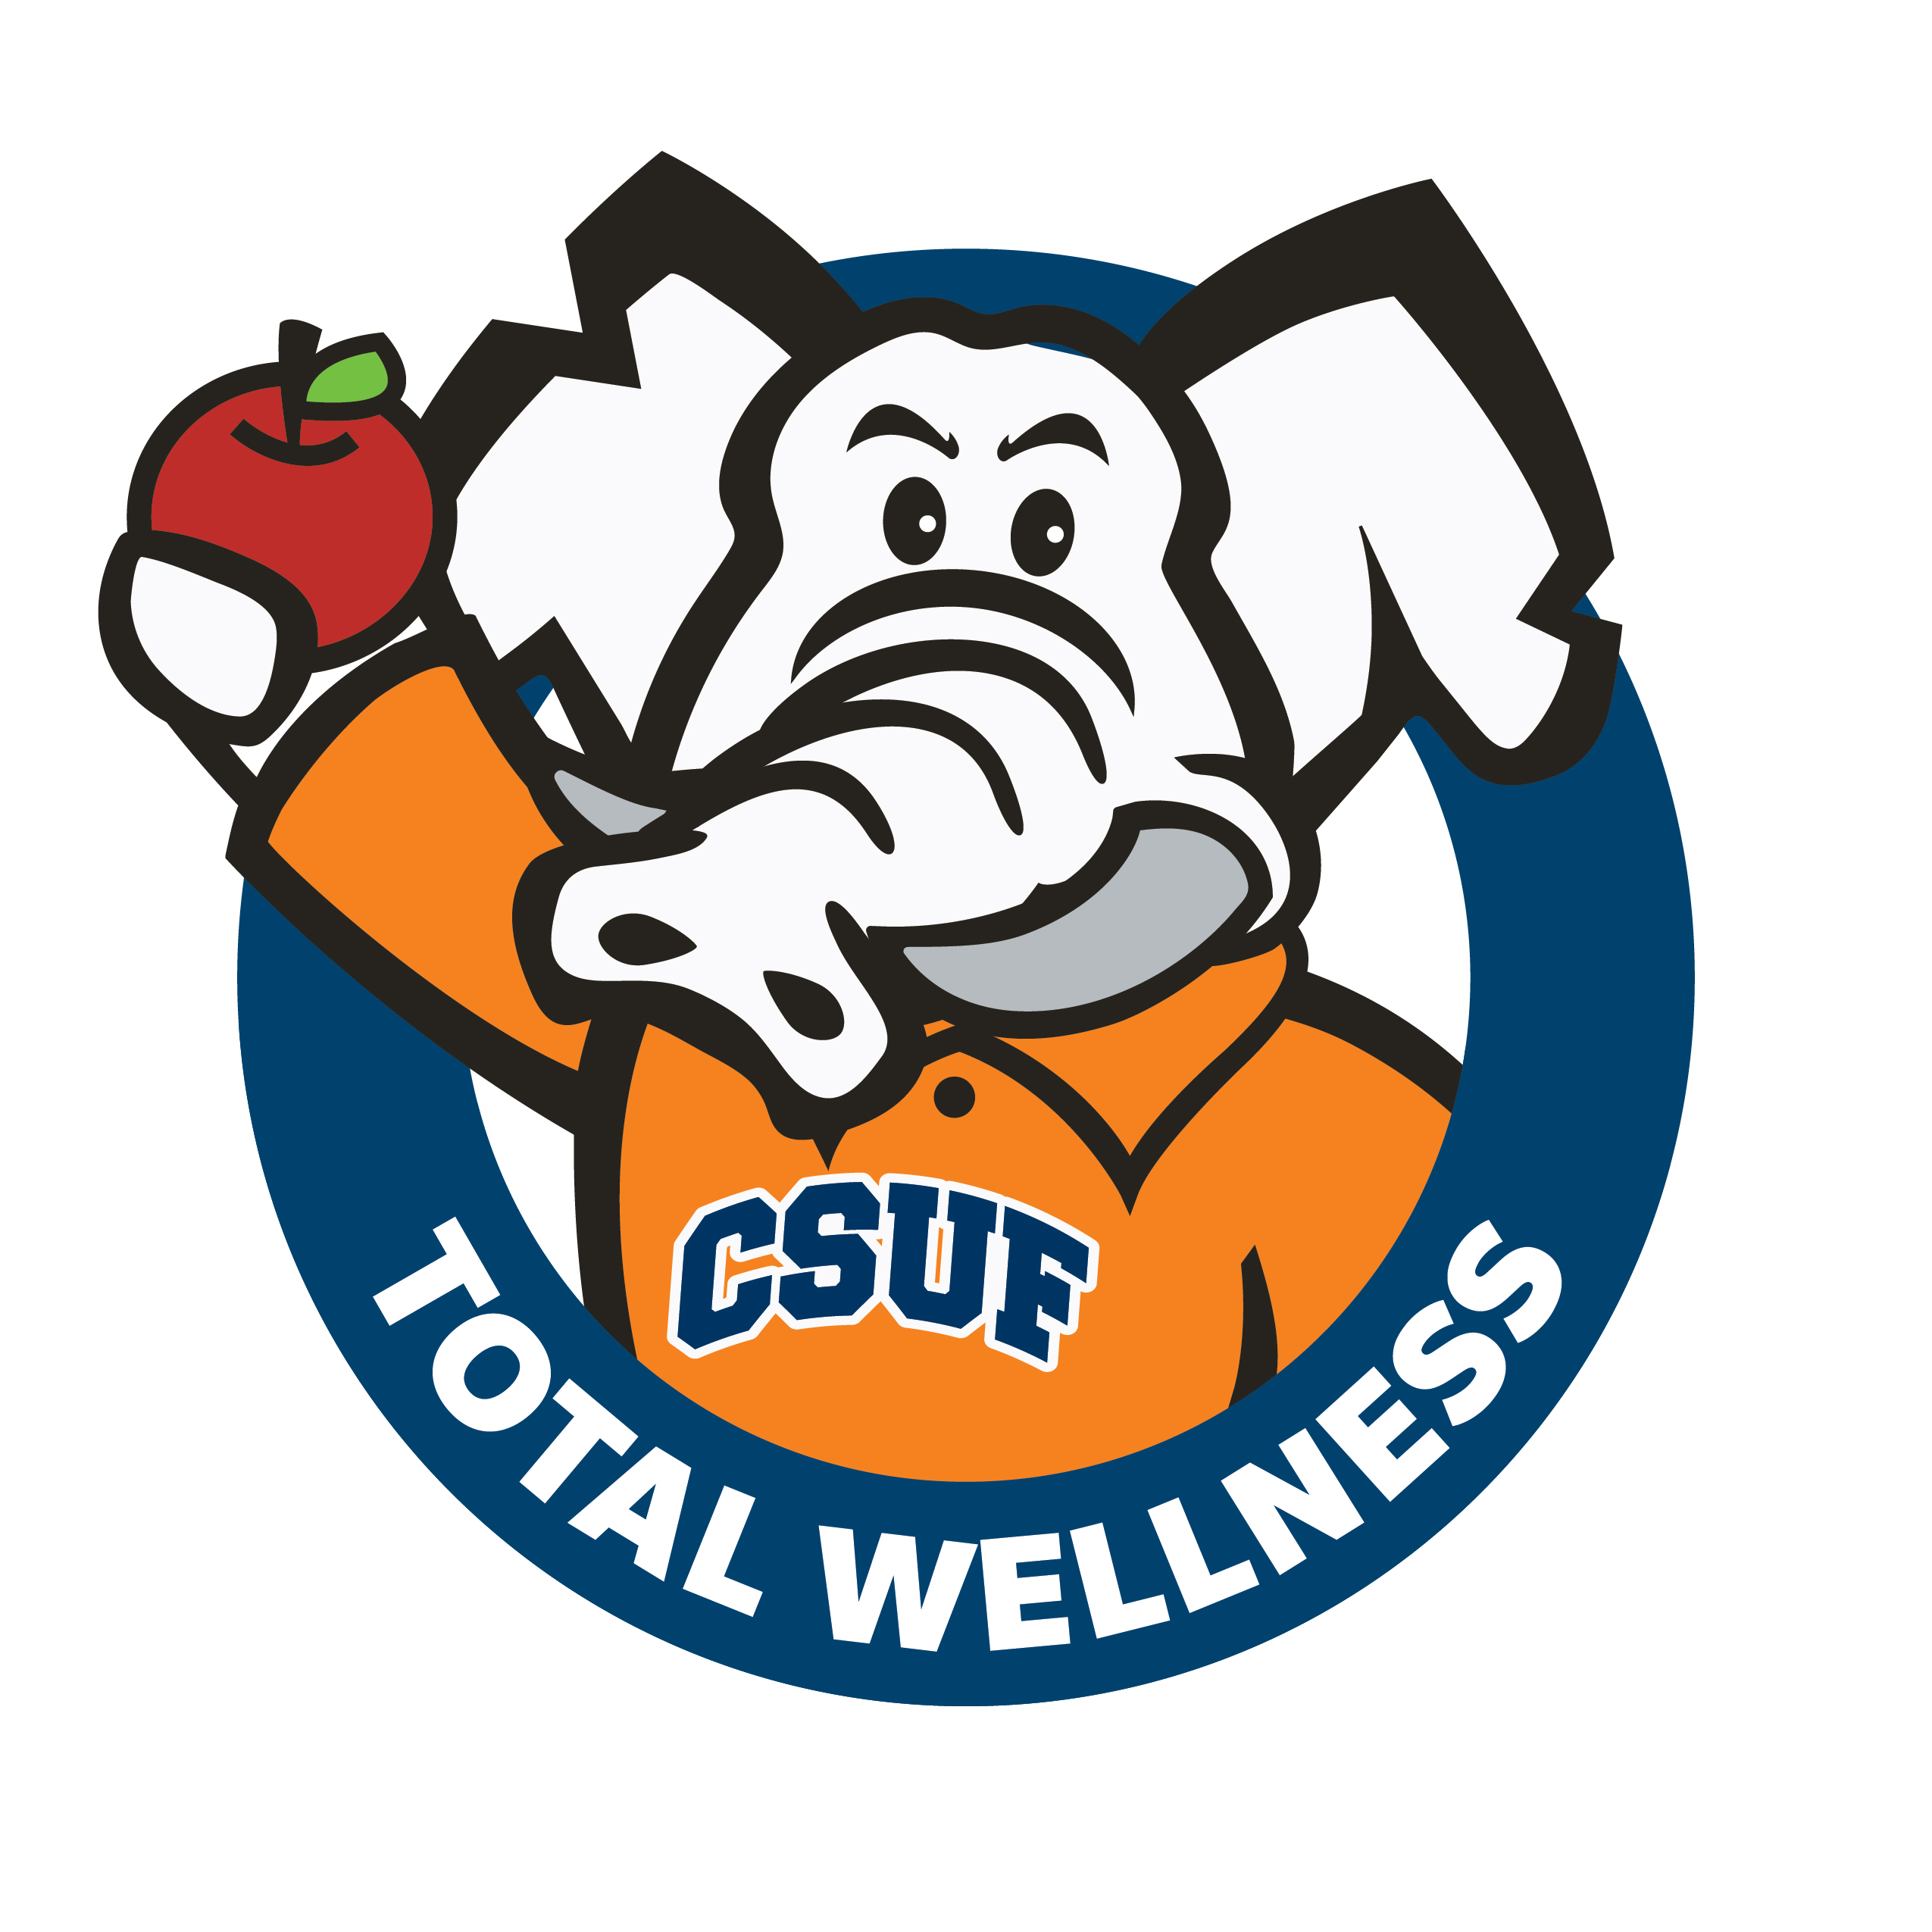 Tuffy holding an apple with a banner tilted Total Wellness.